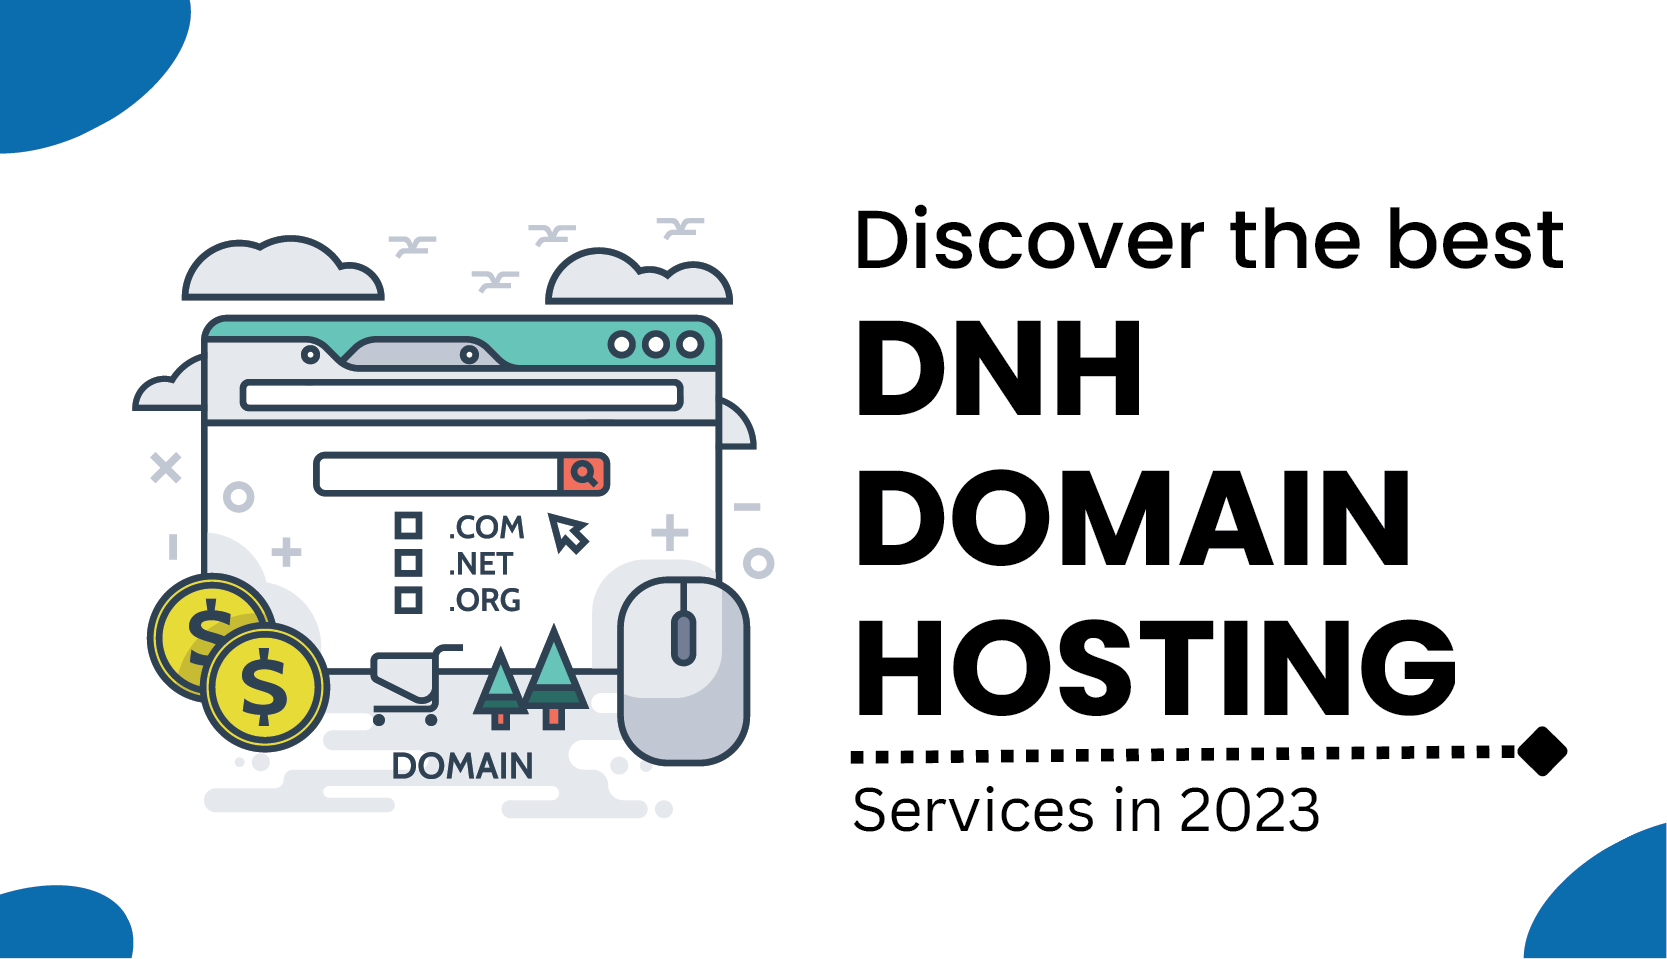 Best DNH Domain Hosting Services